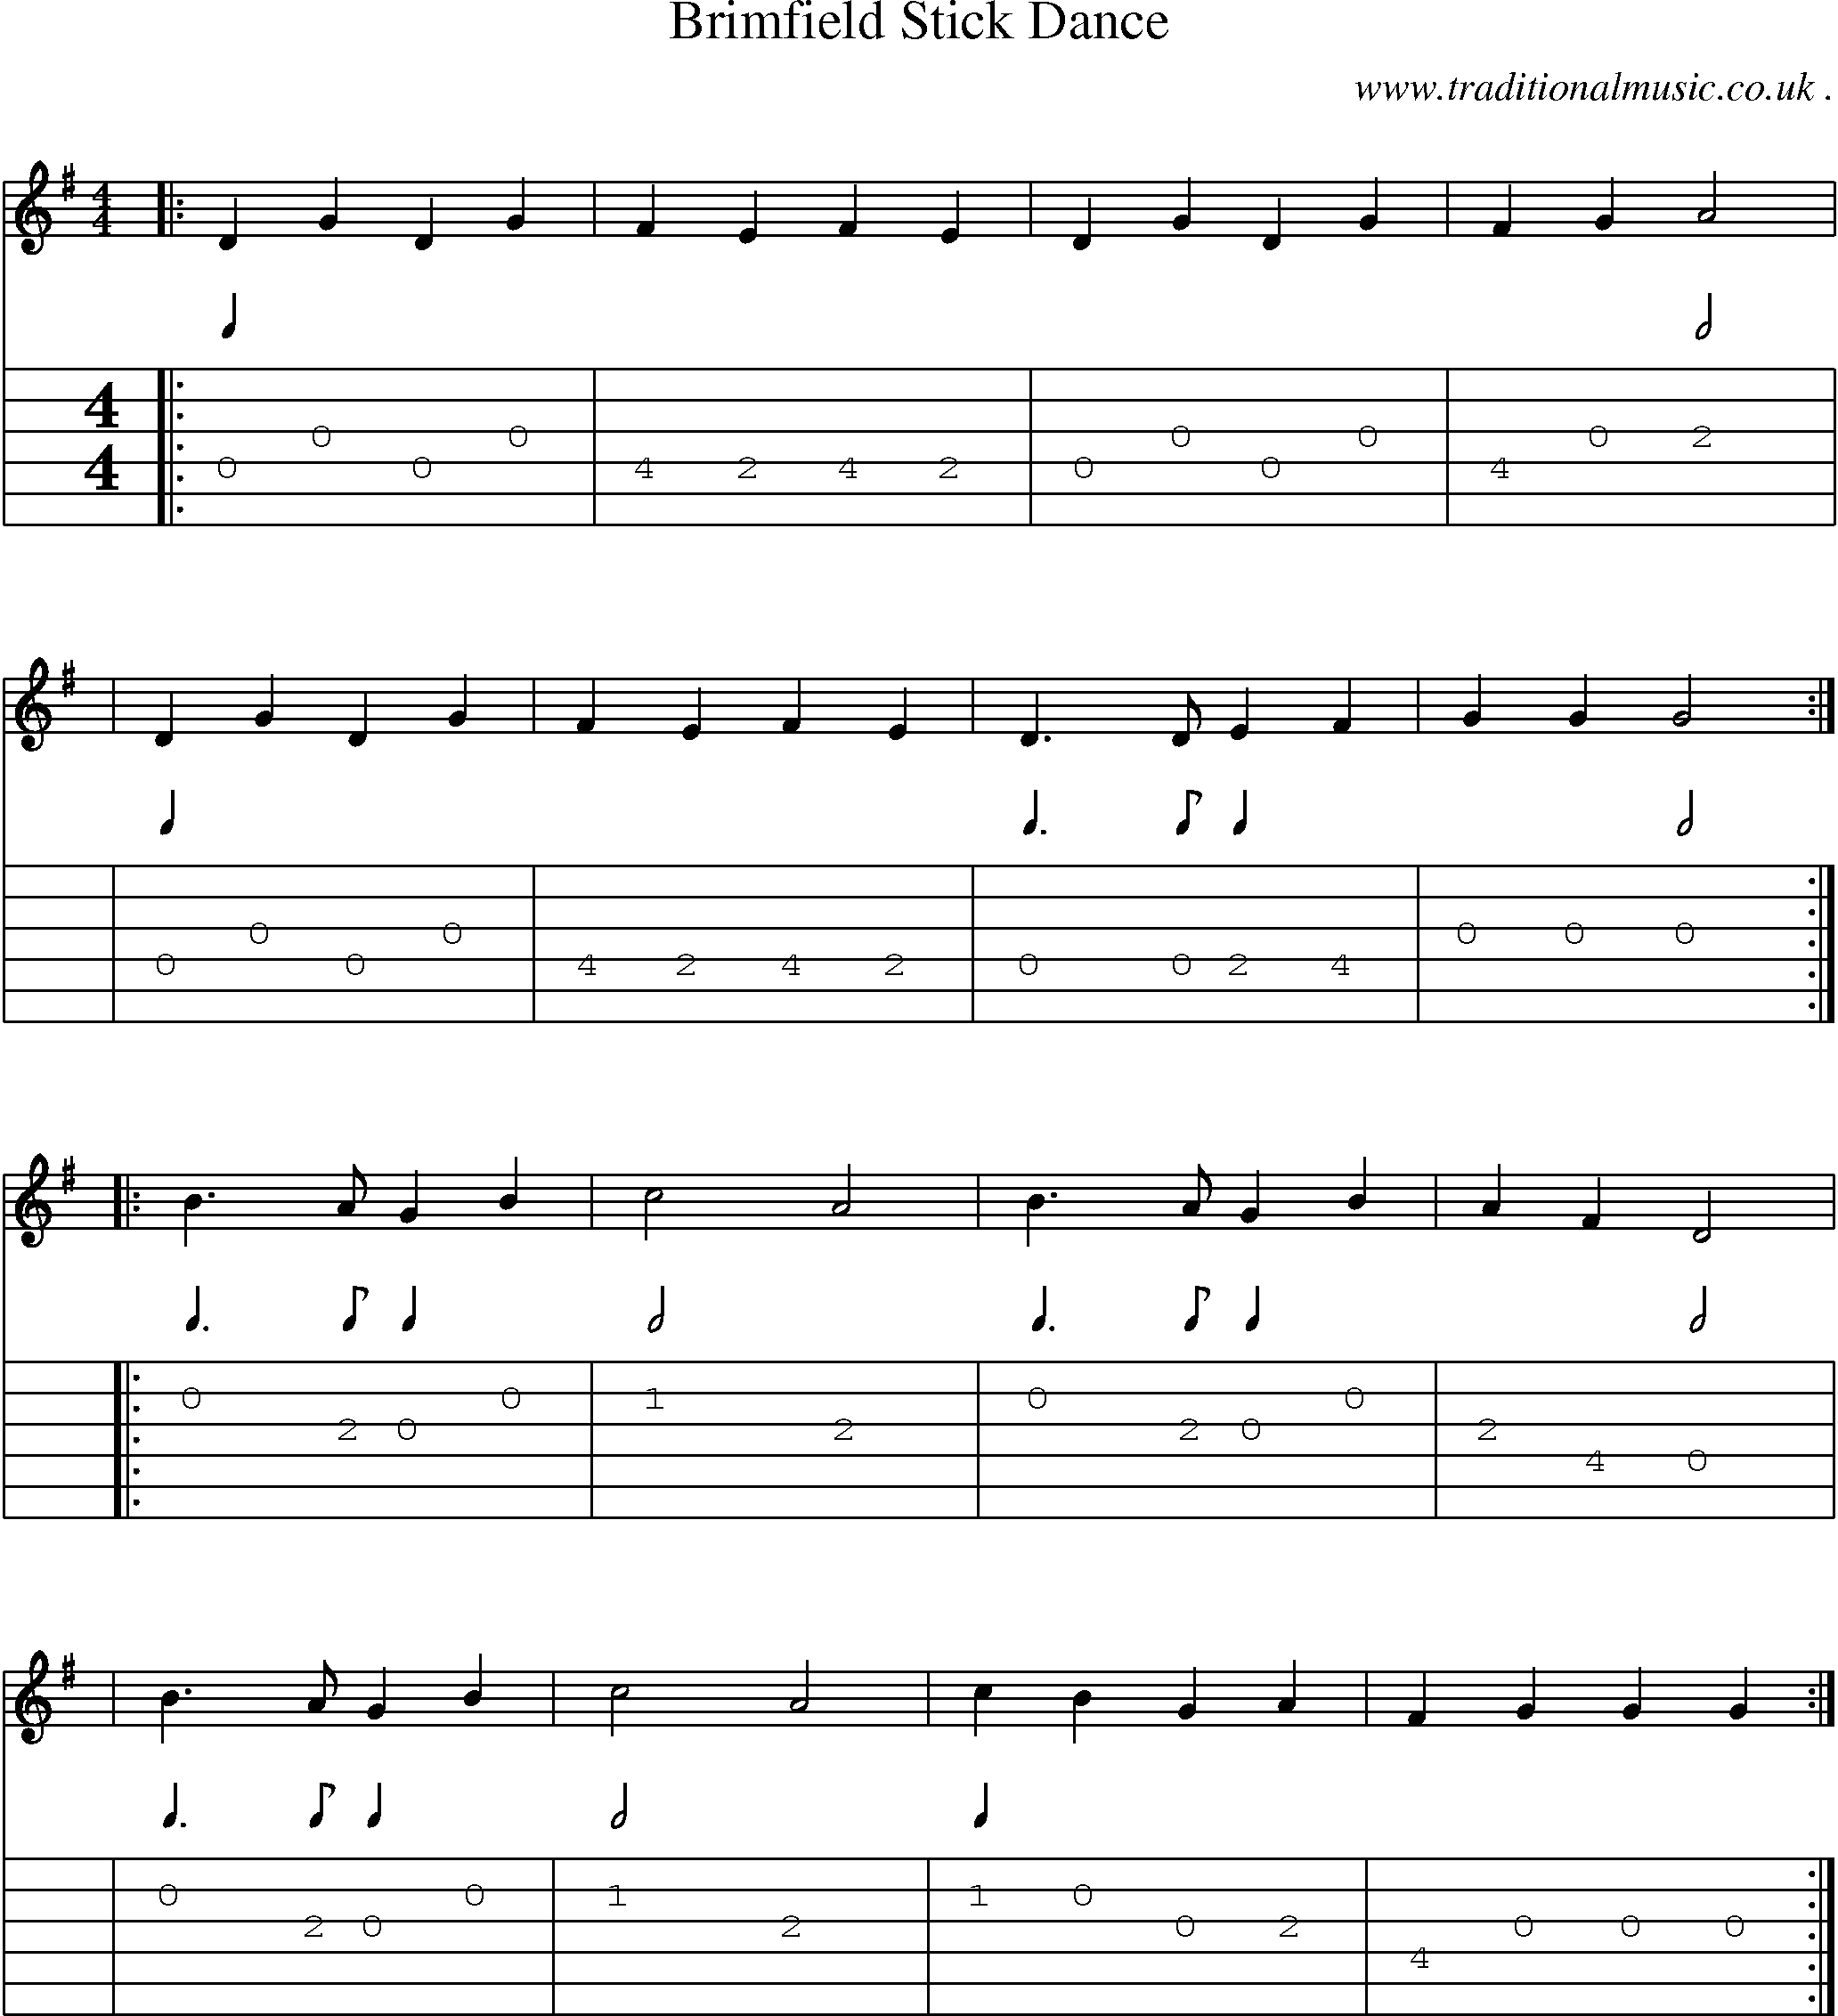 Sheet-Music and Guitar Tabs for Brimfield Stick Dance